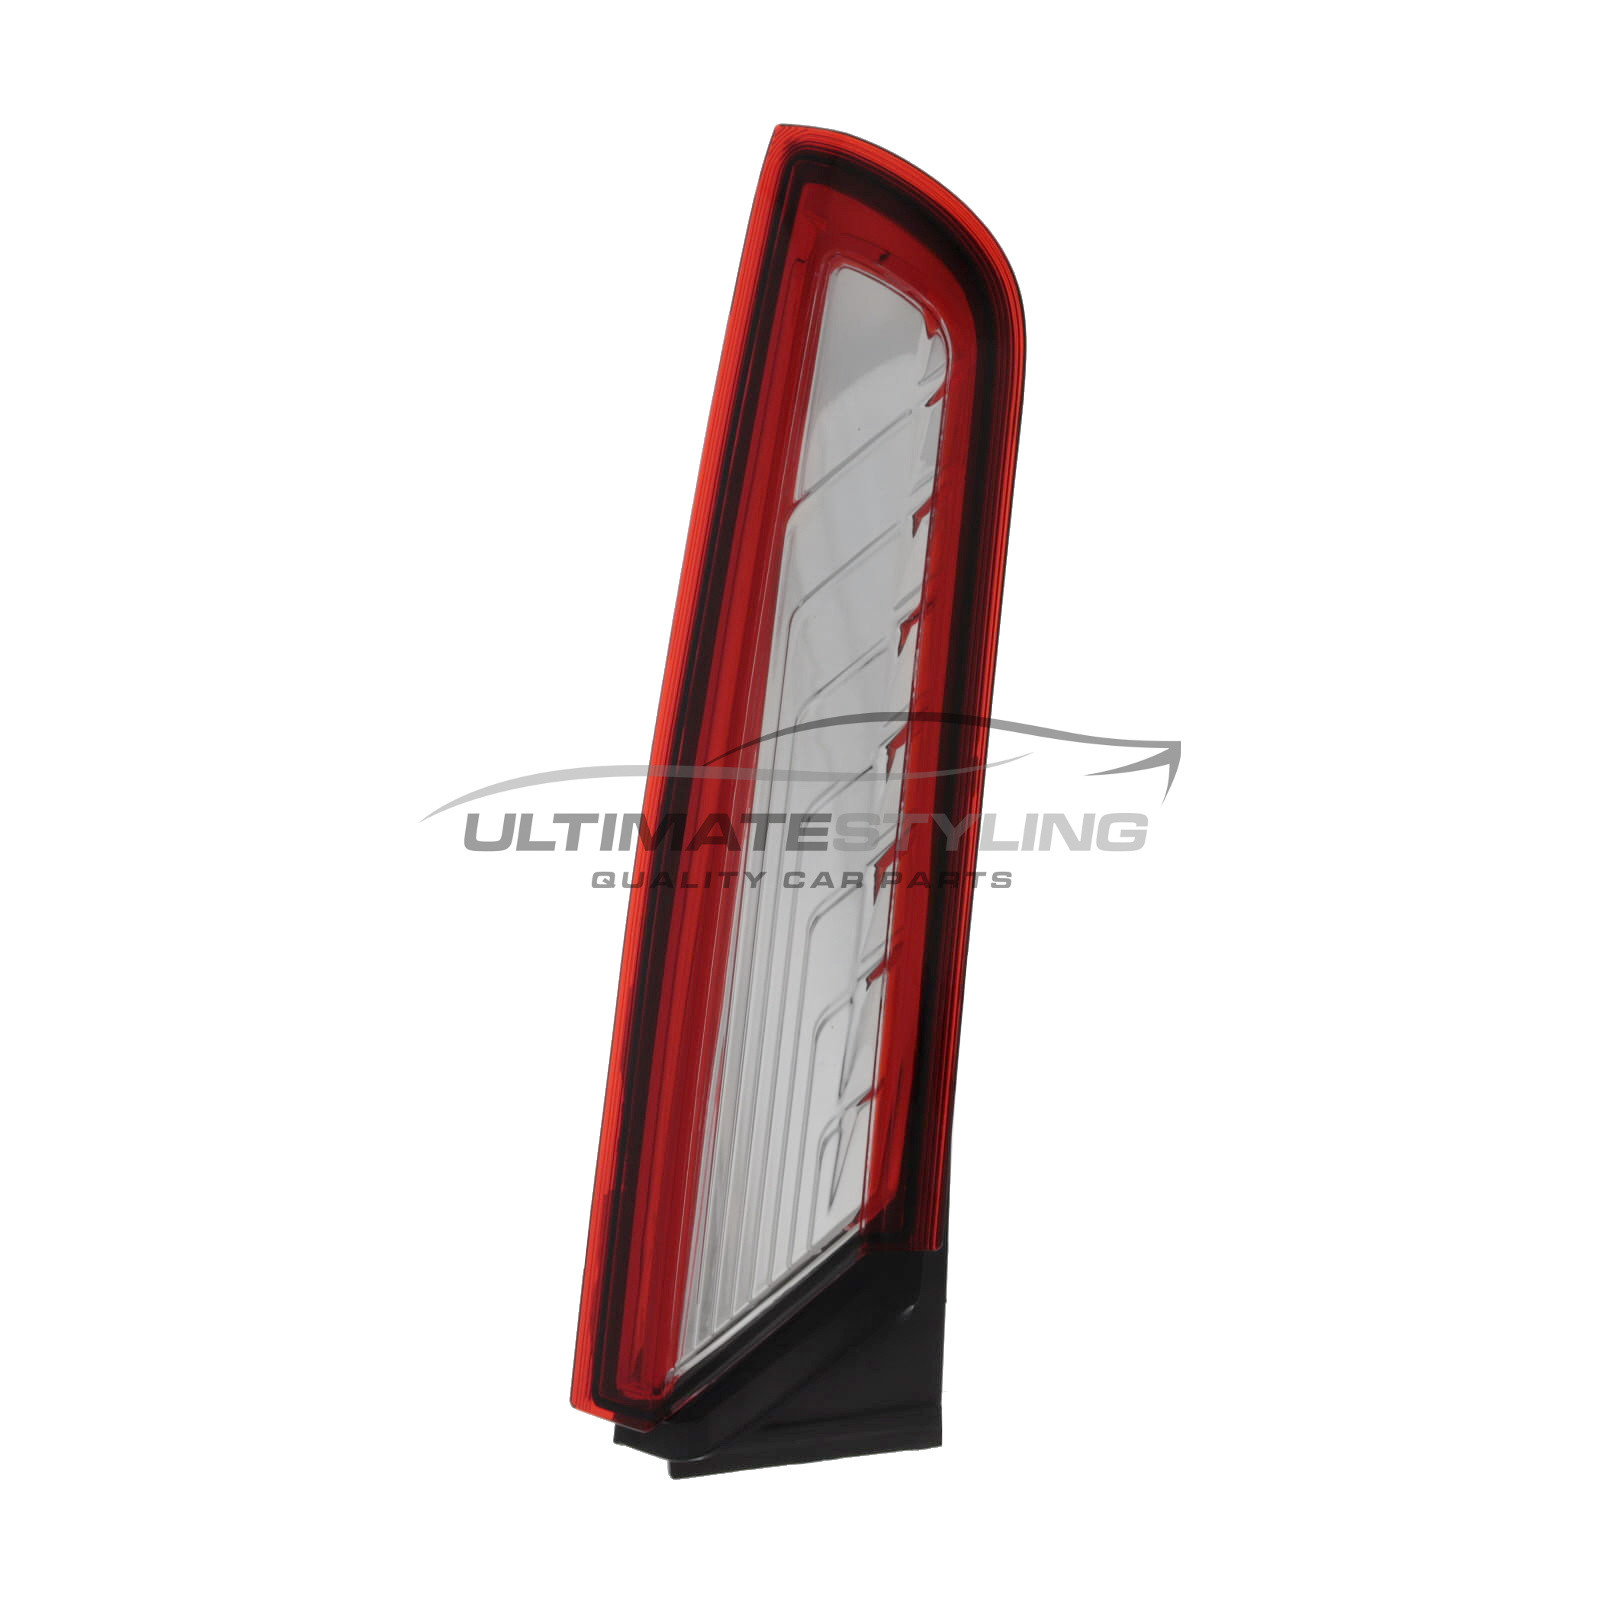 Ford Tourneo Connect / Transit Connect Rear Light / Tail Light - Drivers Side (RH), Rear Upper Section -